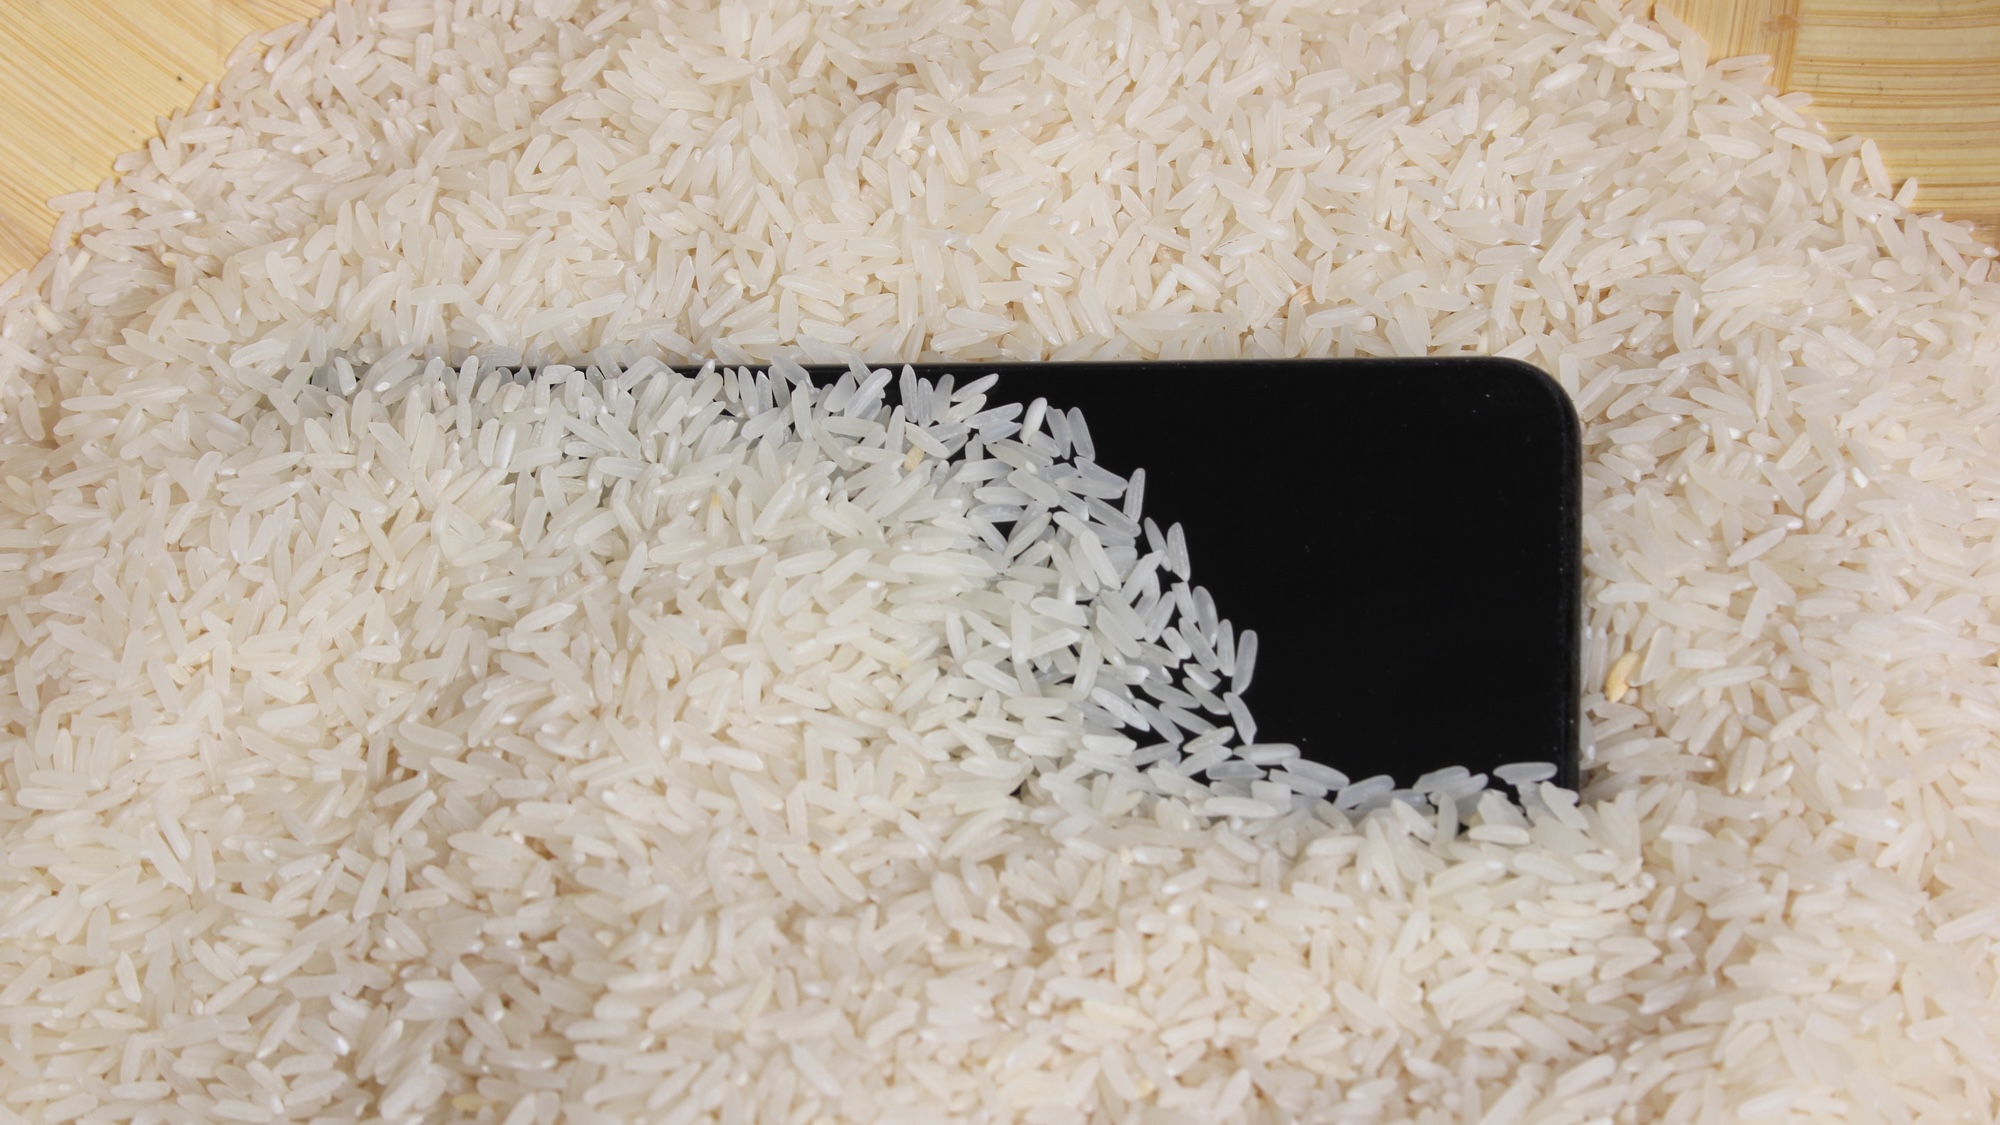 Do not put your wet iPhone in rice, warns Apple